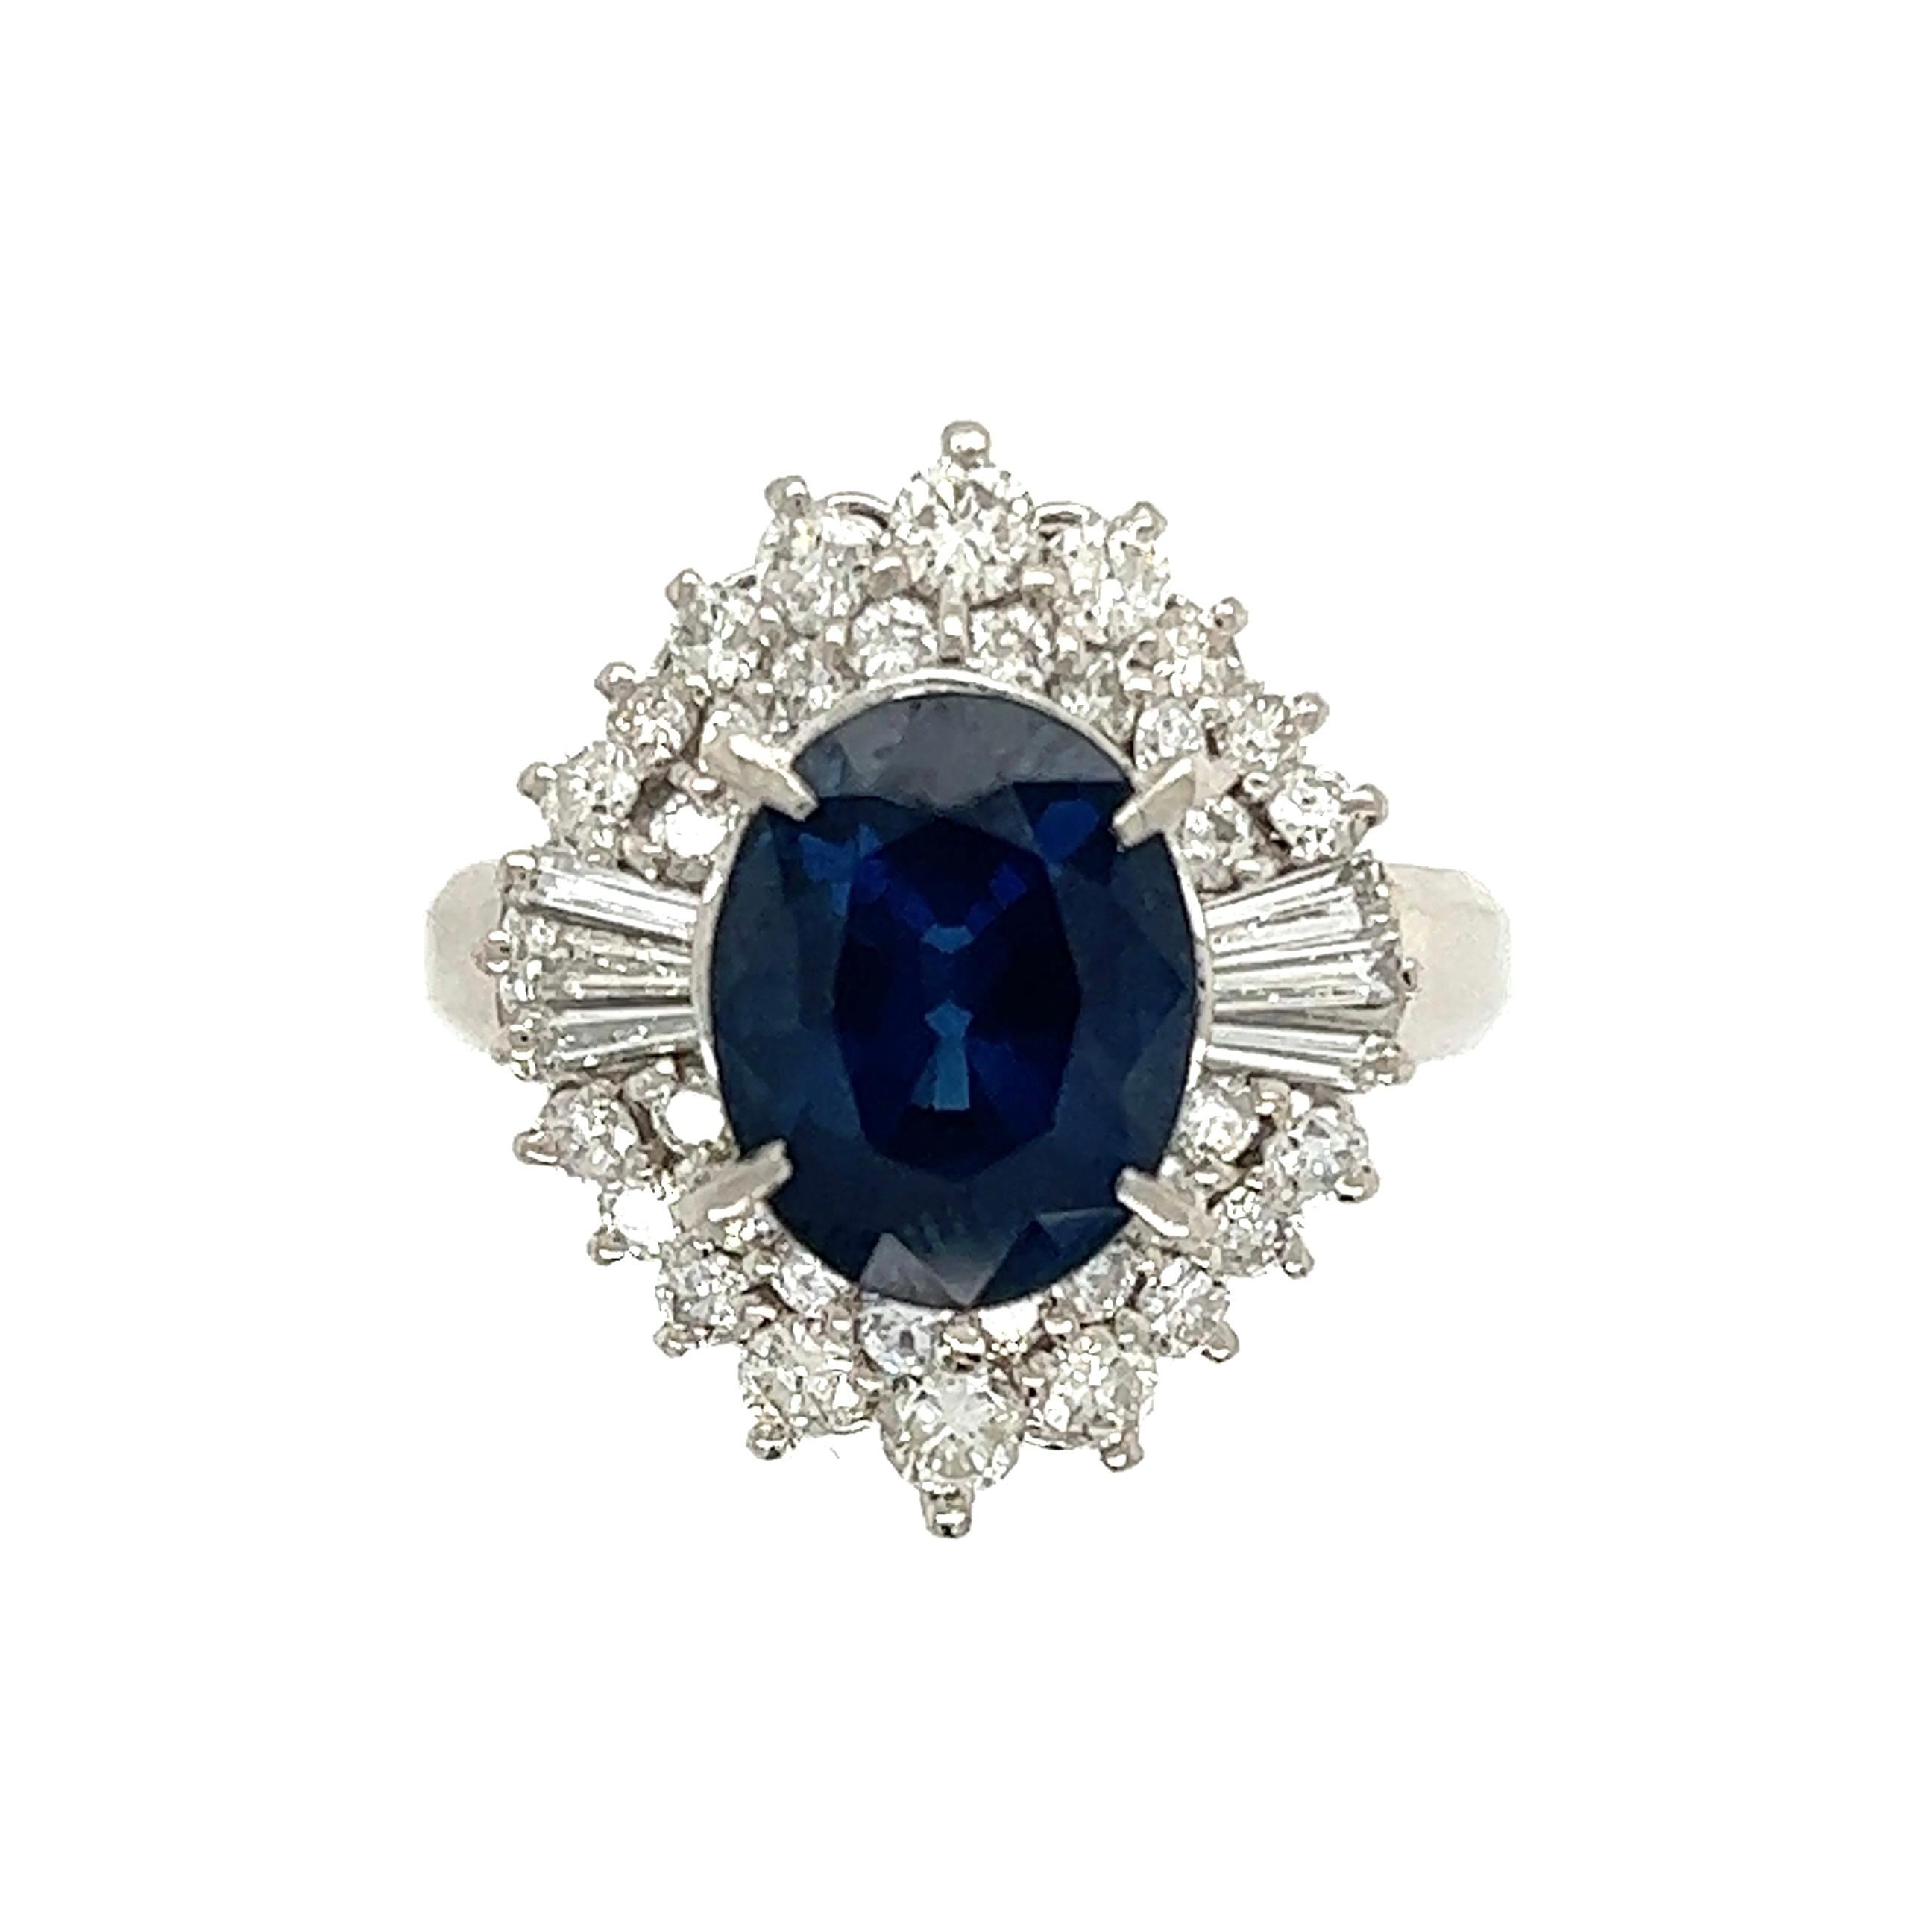 3.34 Carat Sapphire Diamond Platinum Art Deco Revival Ring Estate Fine Jewelry In Excellent Condition For Sale In Montreal, QC